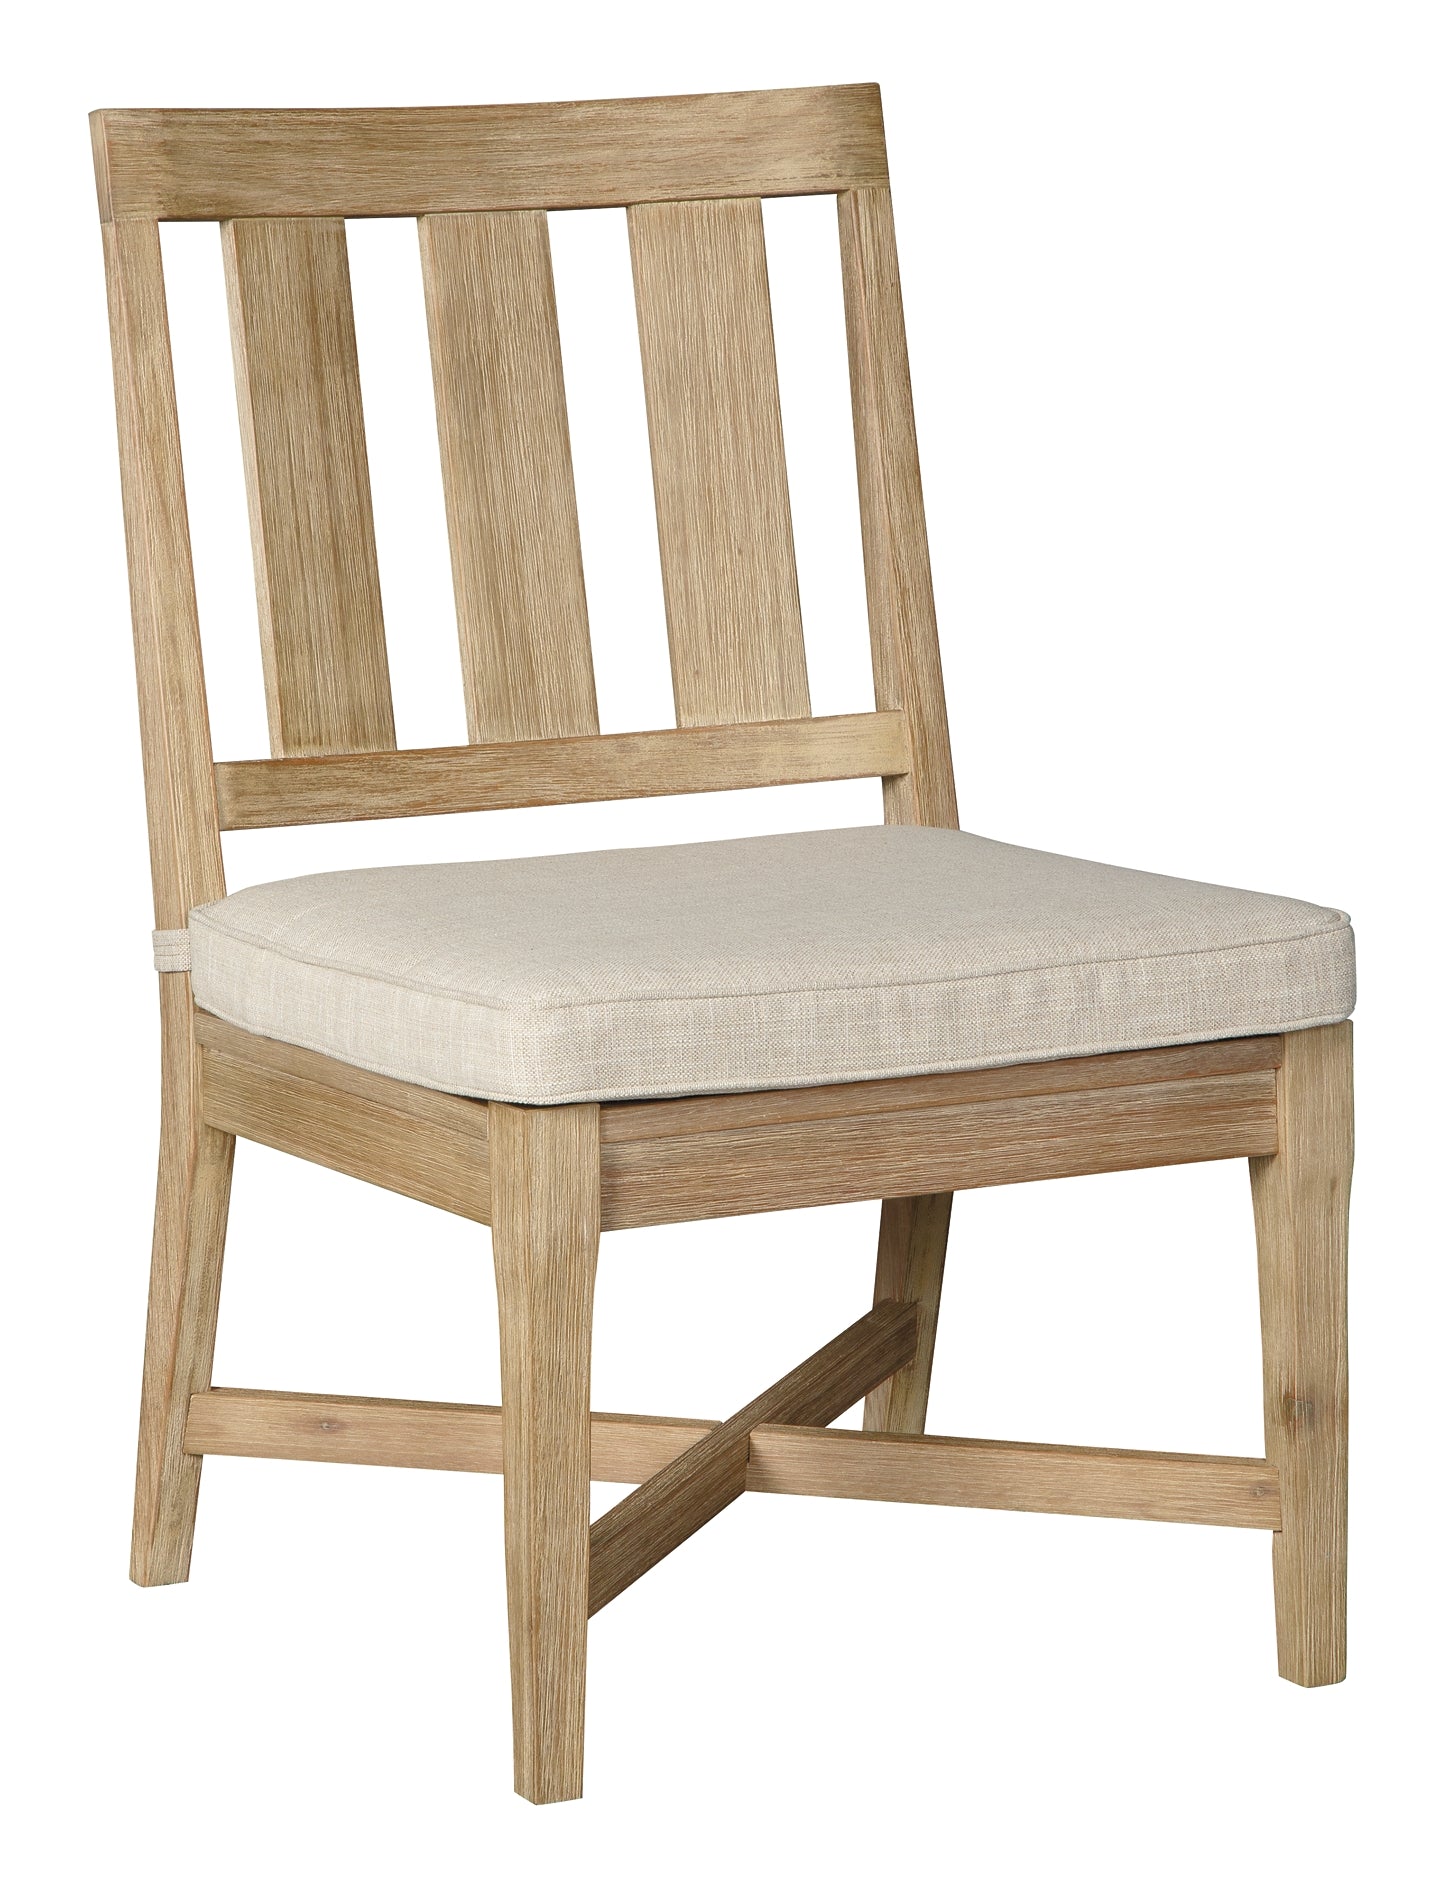 Clare View Chair with Cushion (2/CN)